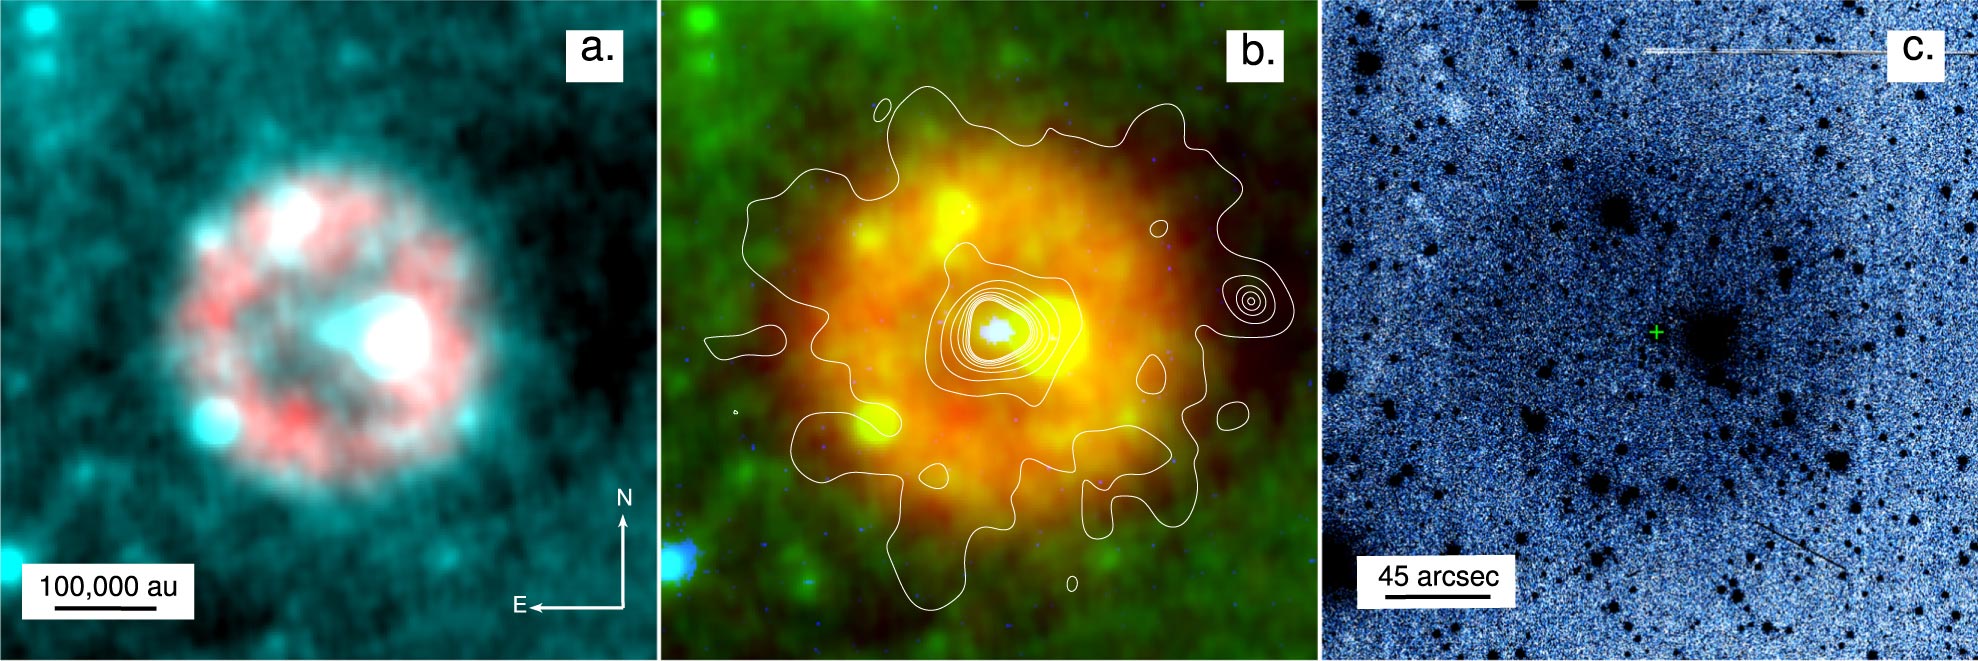 Astronomers Solve 900-Year-Old Cosmic Mystery Surrounding Famous Chinese Supernova of 1181AD - SciTechDaily